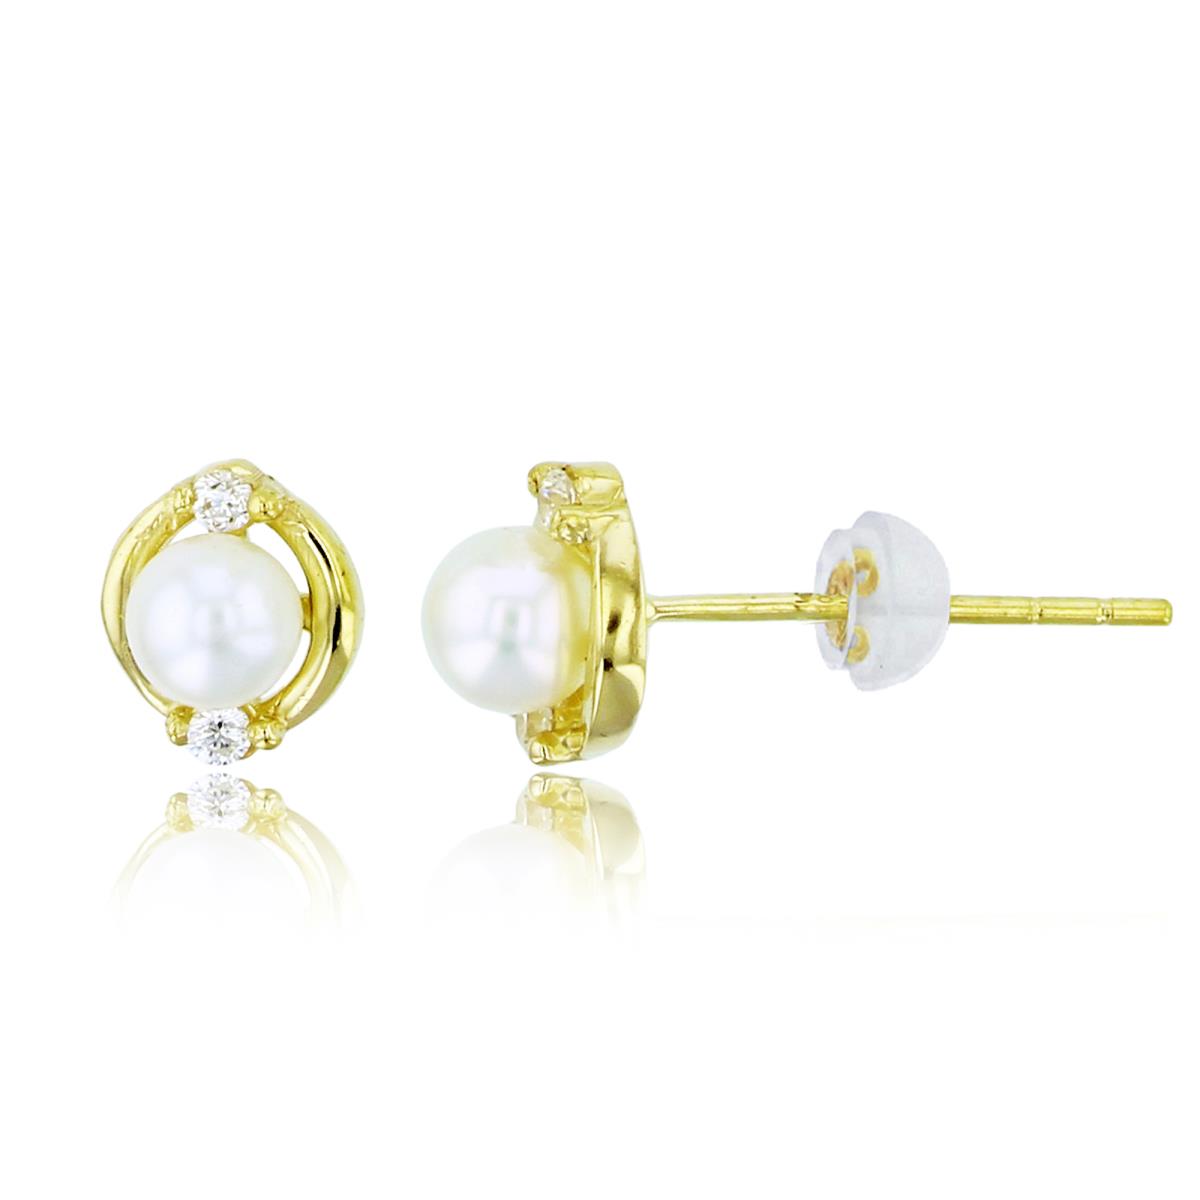 10K Yellow Gold 4mm Rnd Pearl & Rnd White CZ Studs with Silicon Backs